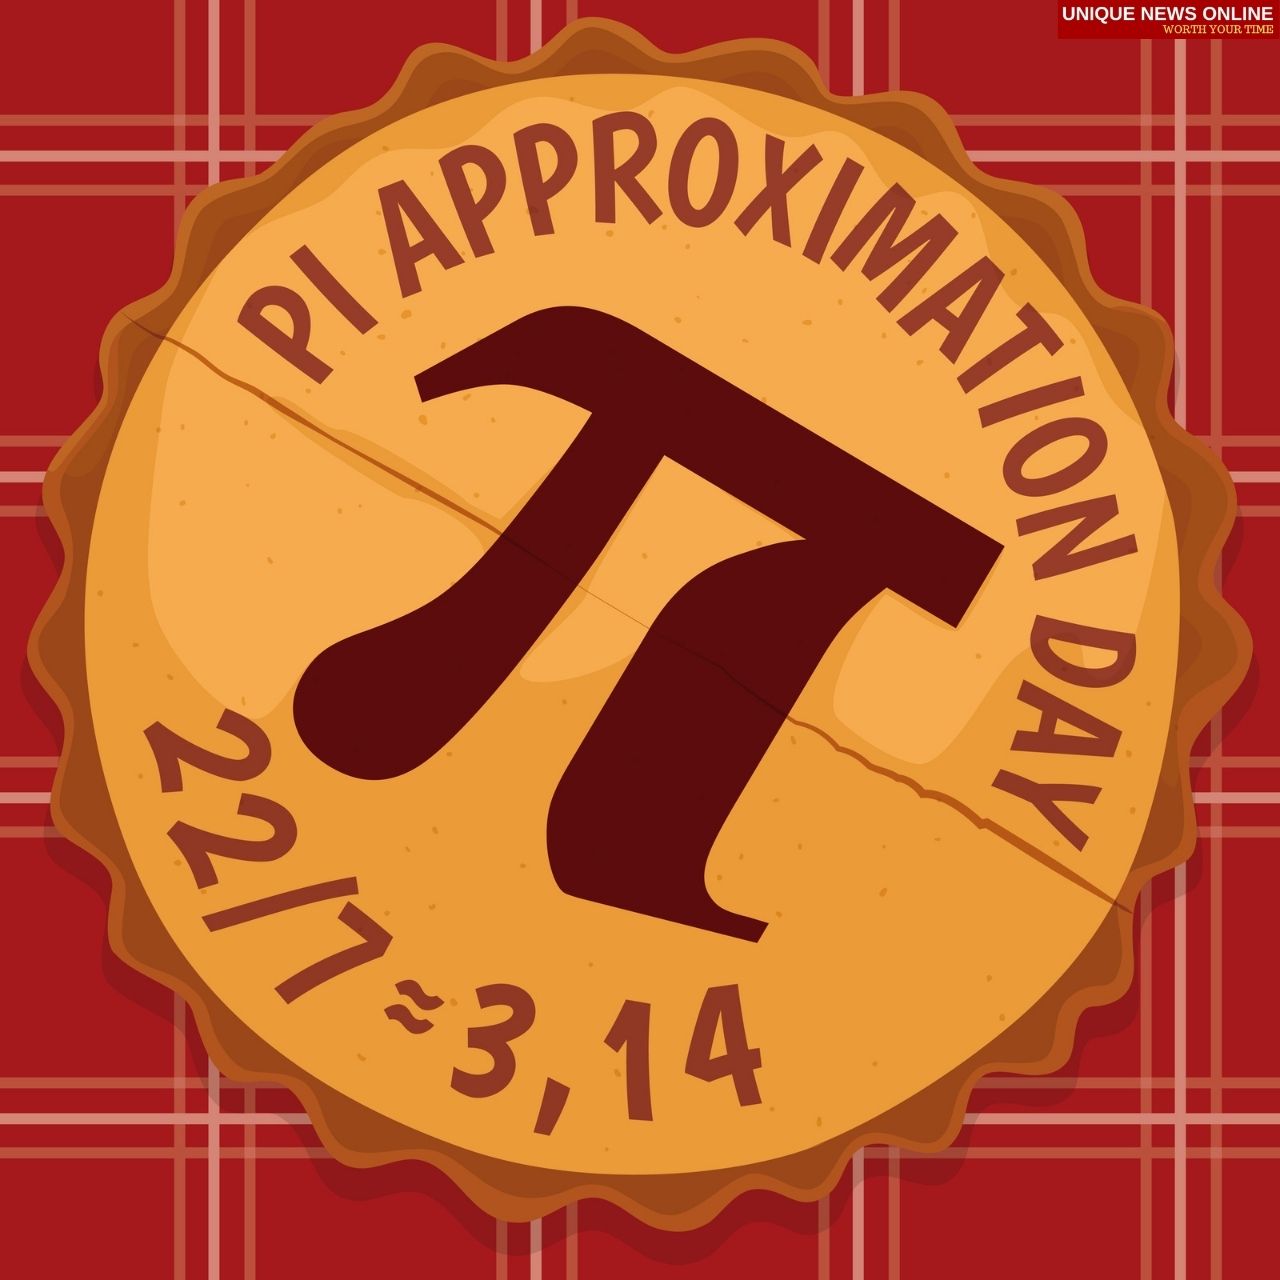 Pi Approximation Day 2021 Quotes, HD Images, Poster, Messages, and Drawing to Share